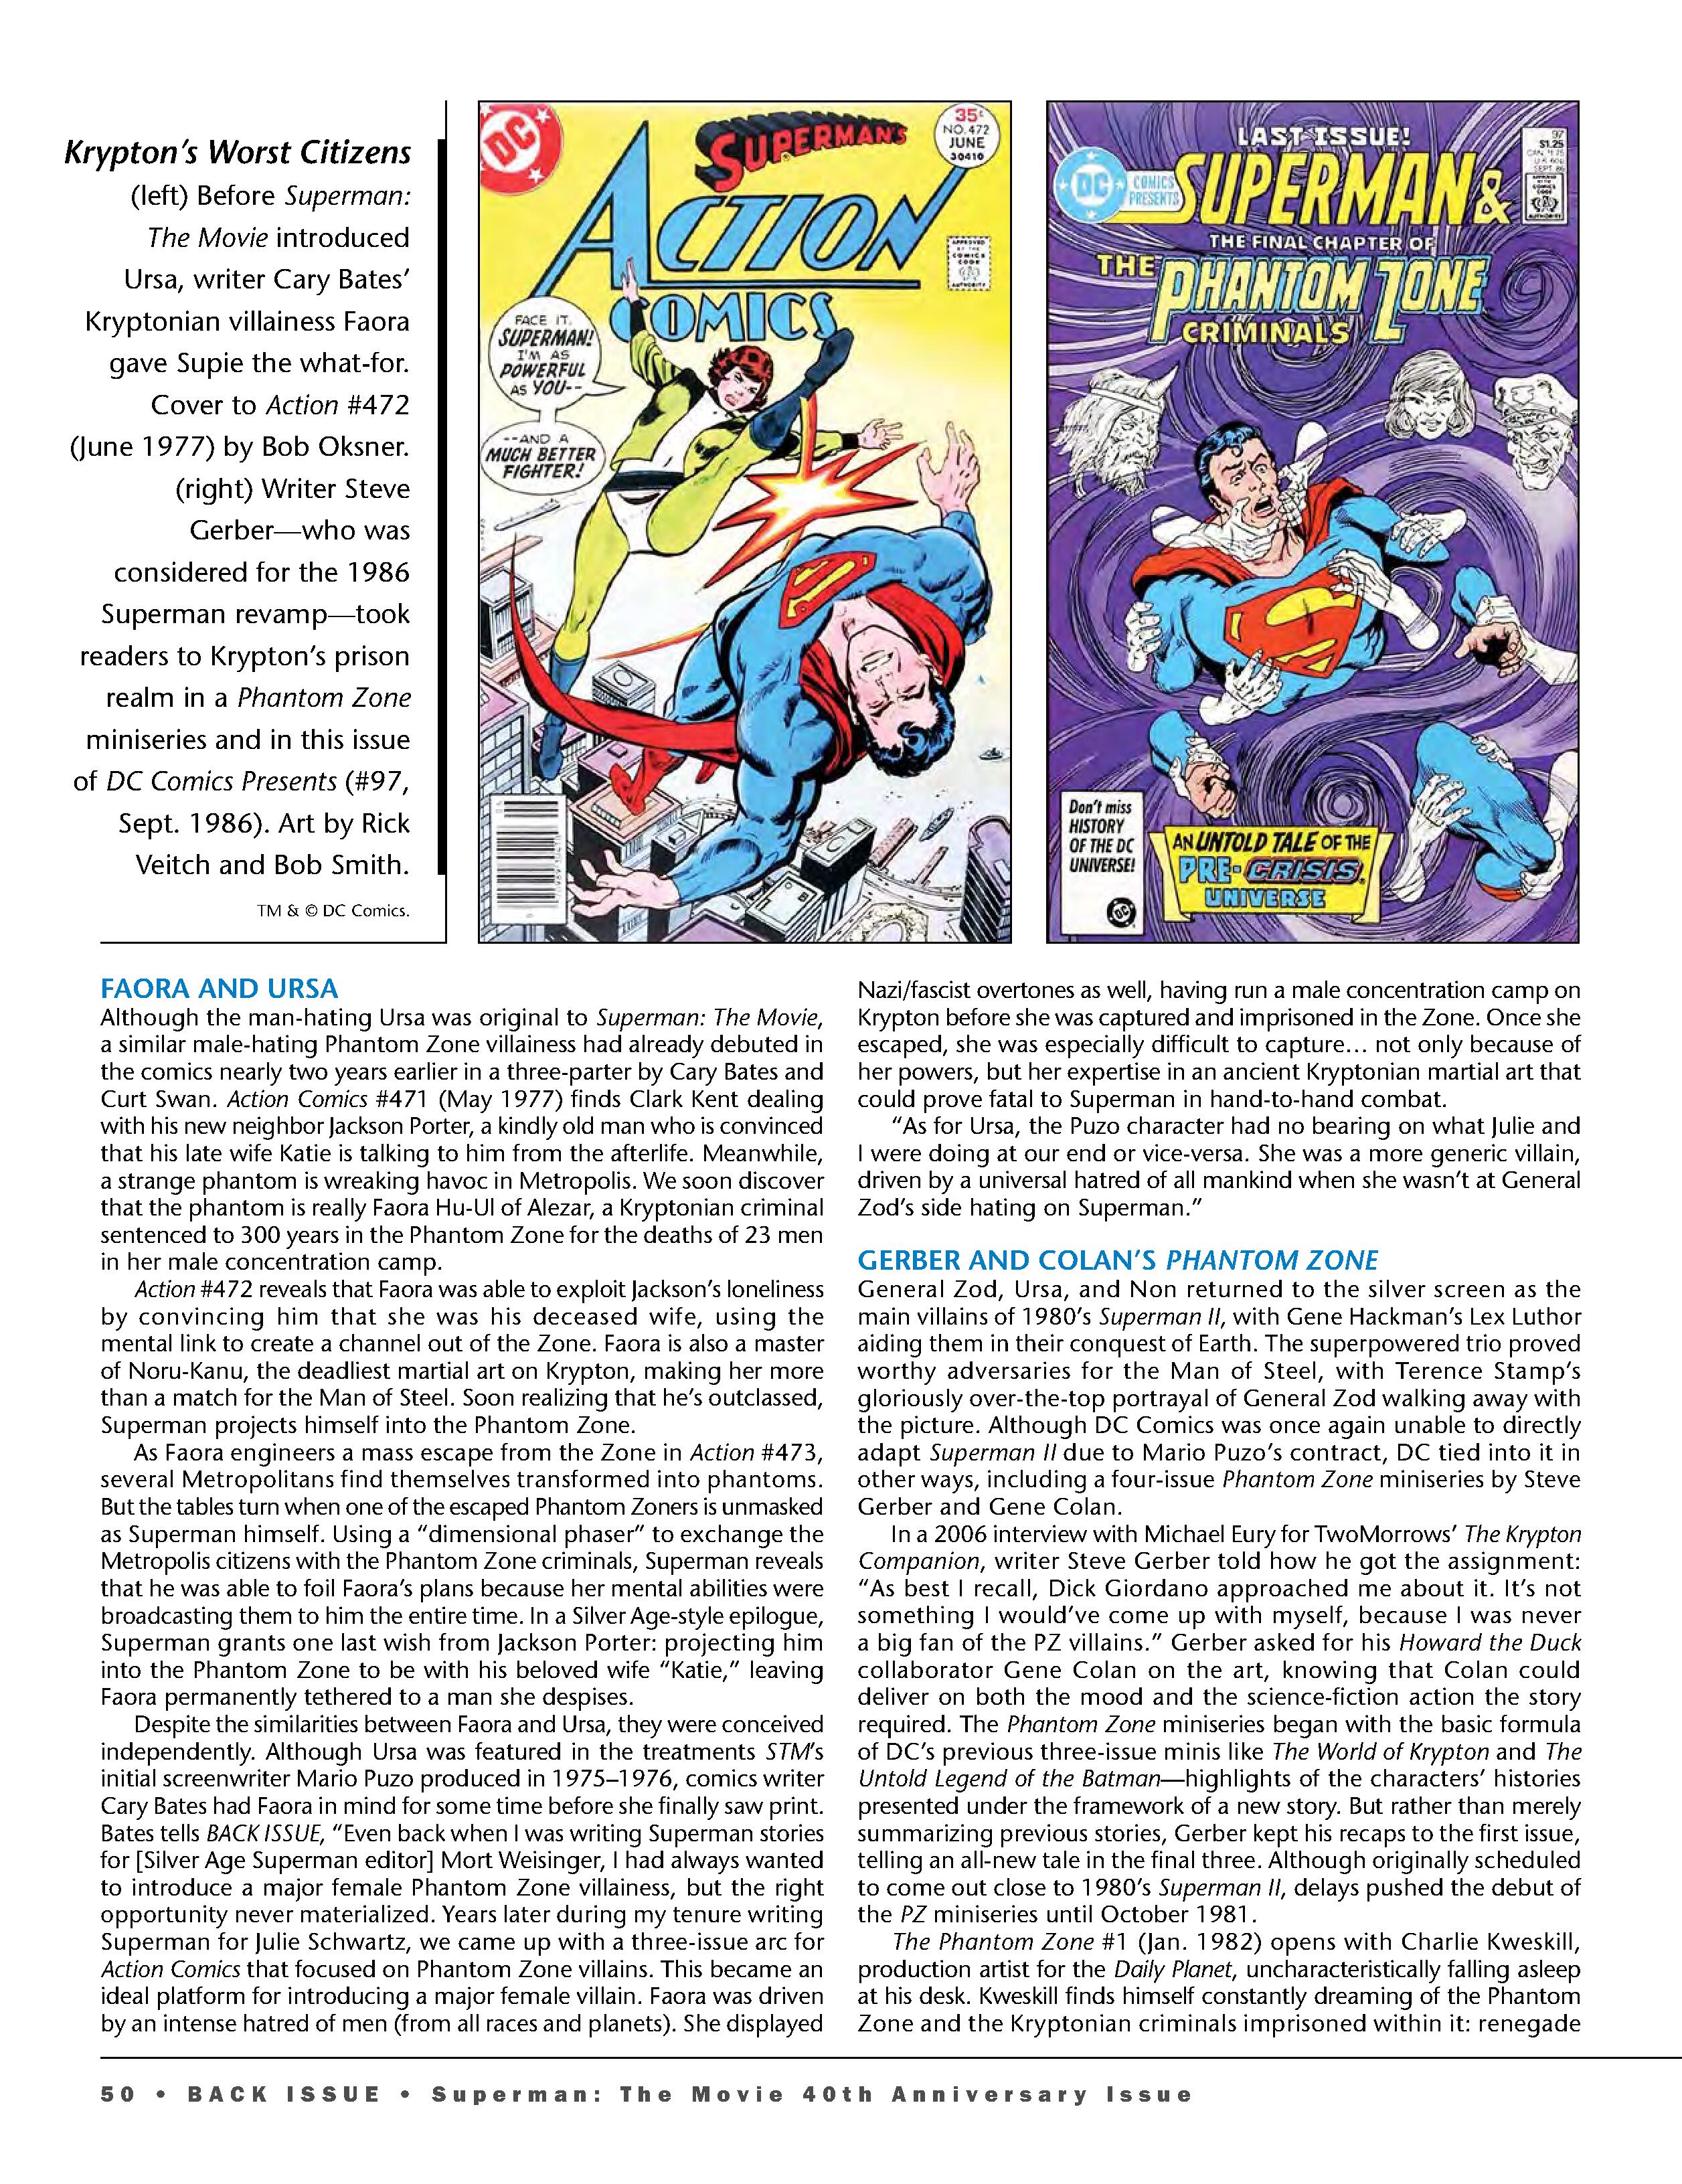 Read online Back Issue comic -  Issue #109 - 52